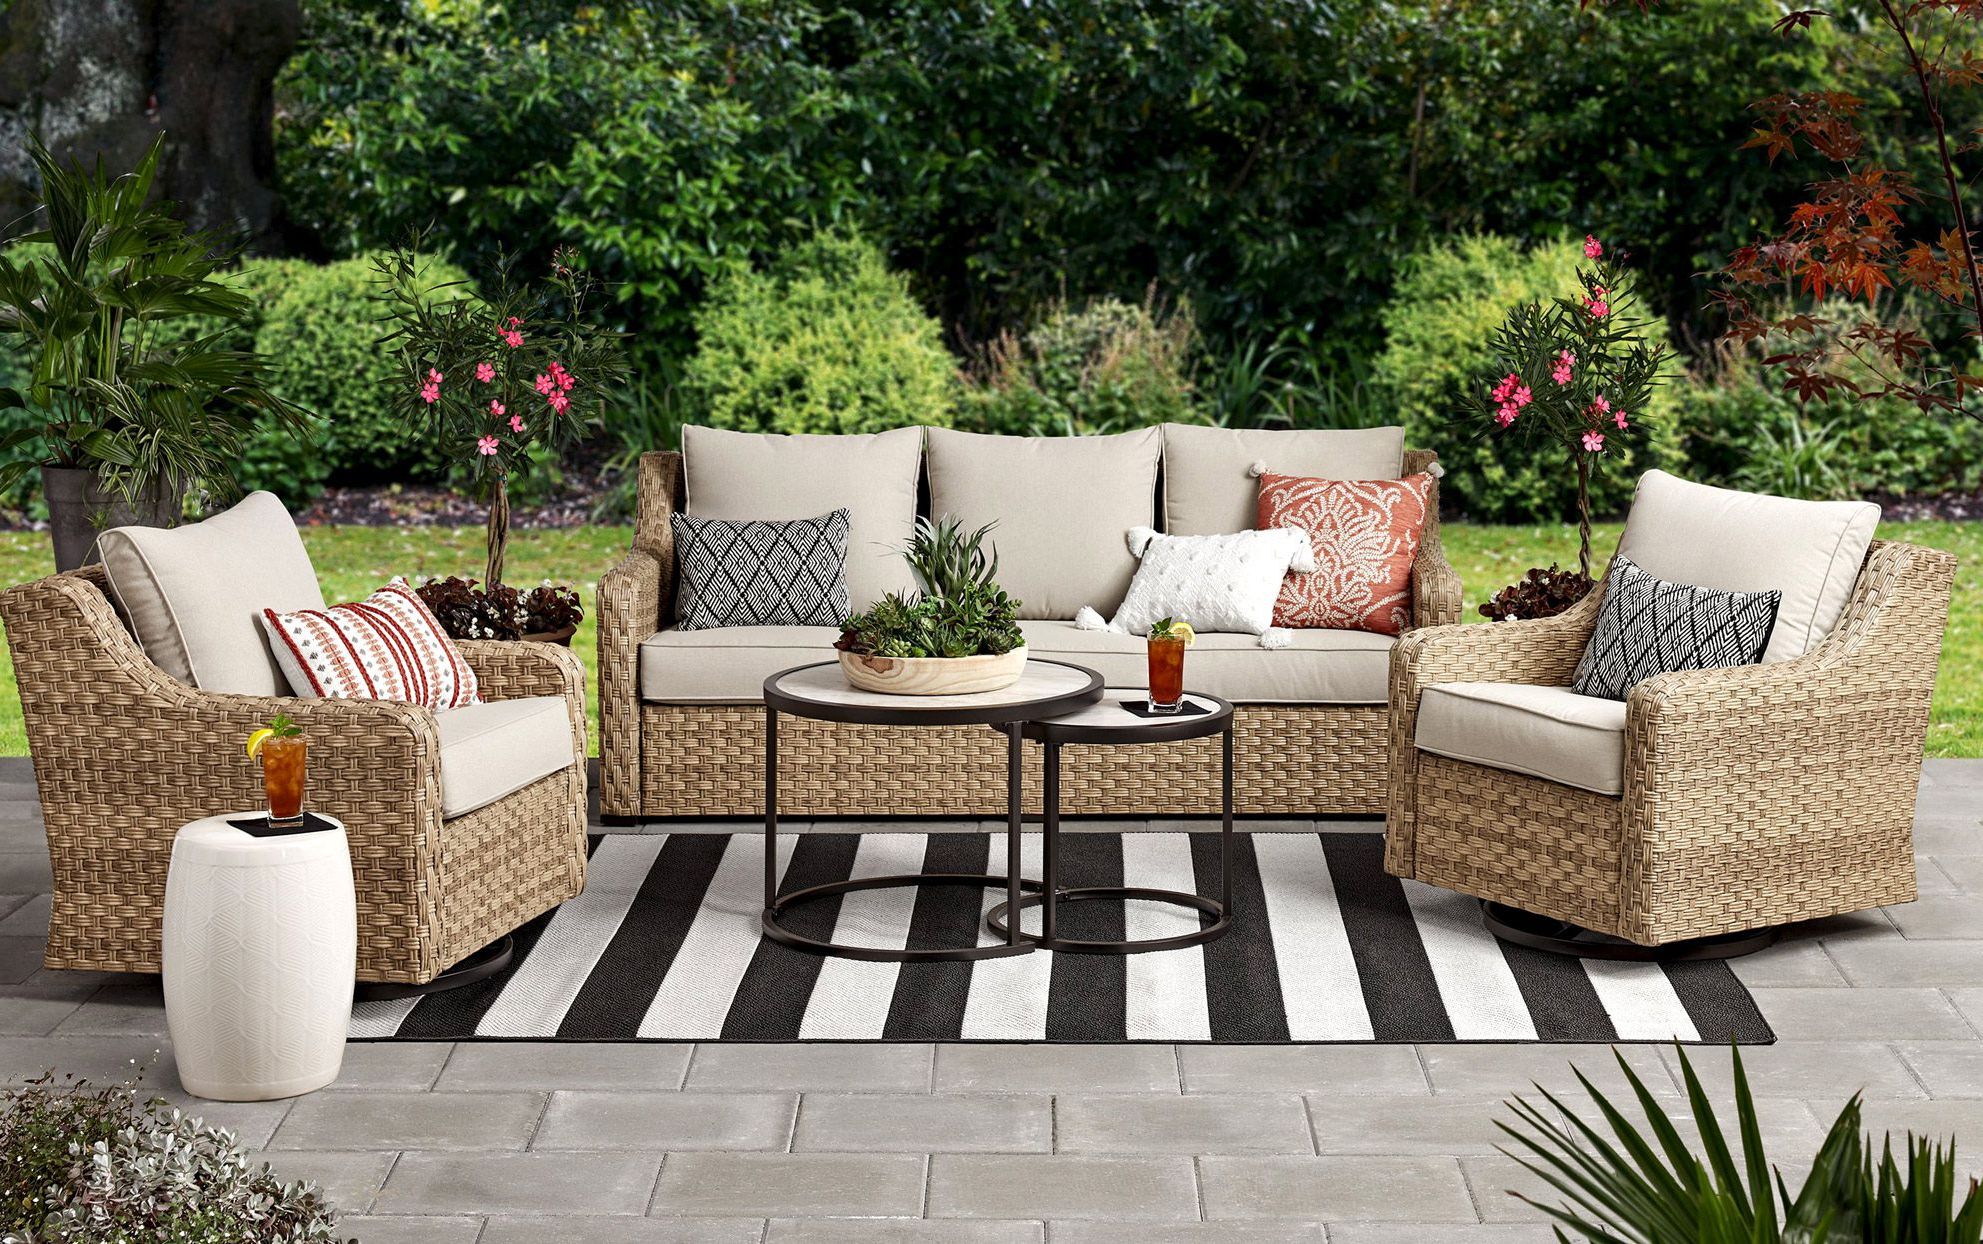 2 Piece Swivel Gliders With Patio Cover In 2020 This Stylish Wicker Patio Set Keeps Selling Out—here's Why We Love It (View 5 of 15)